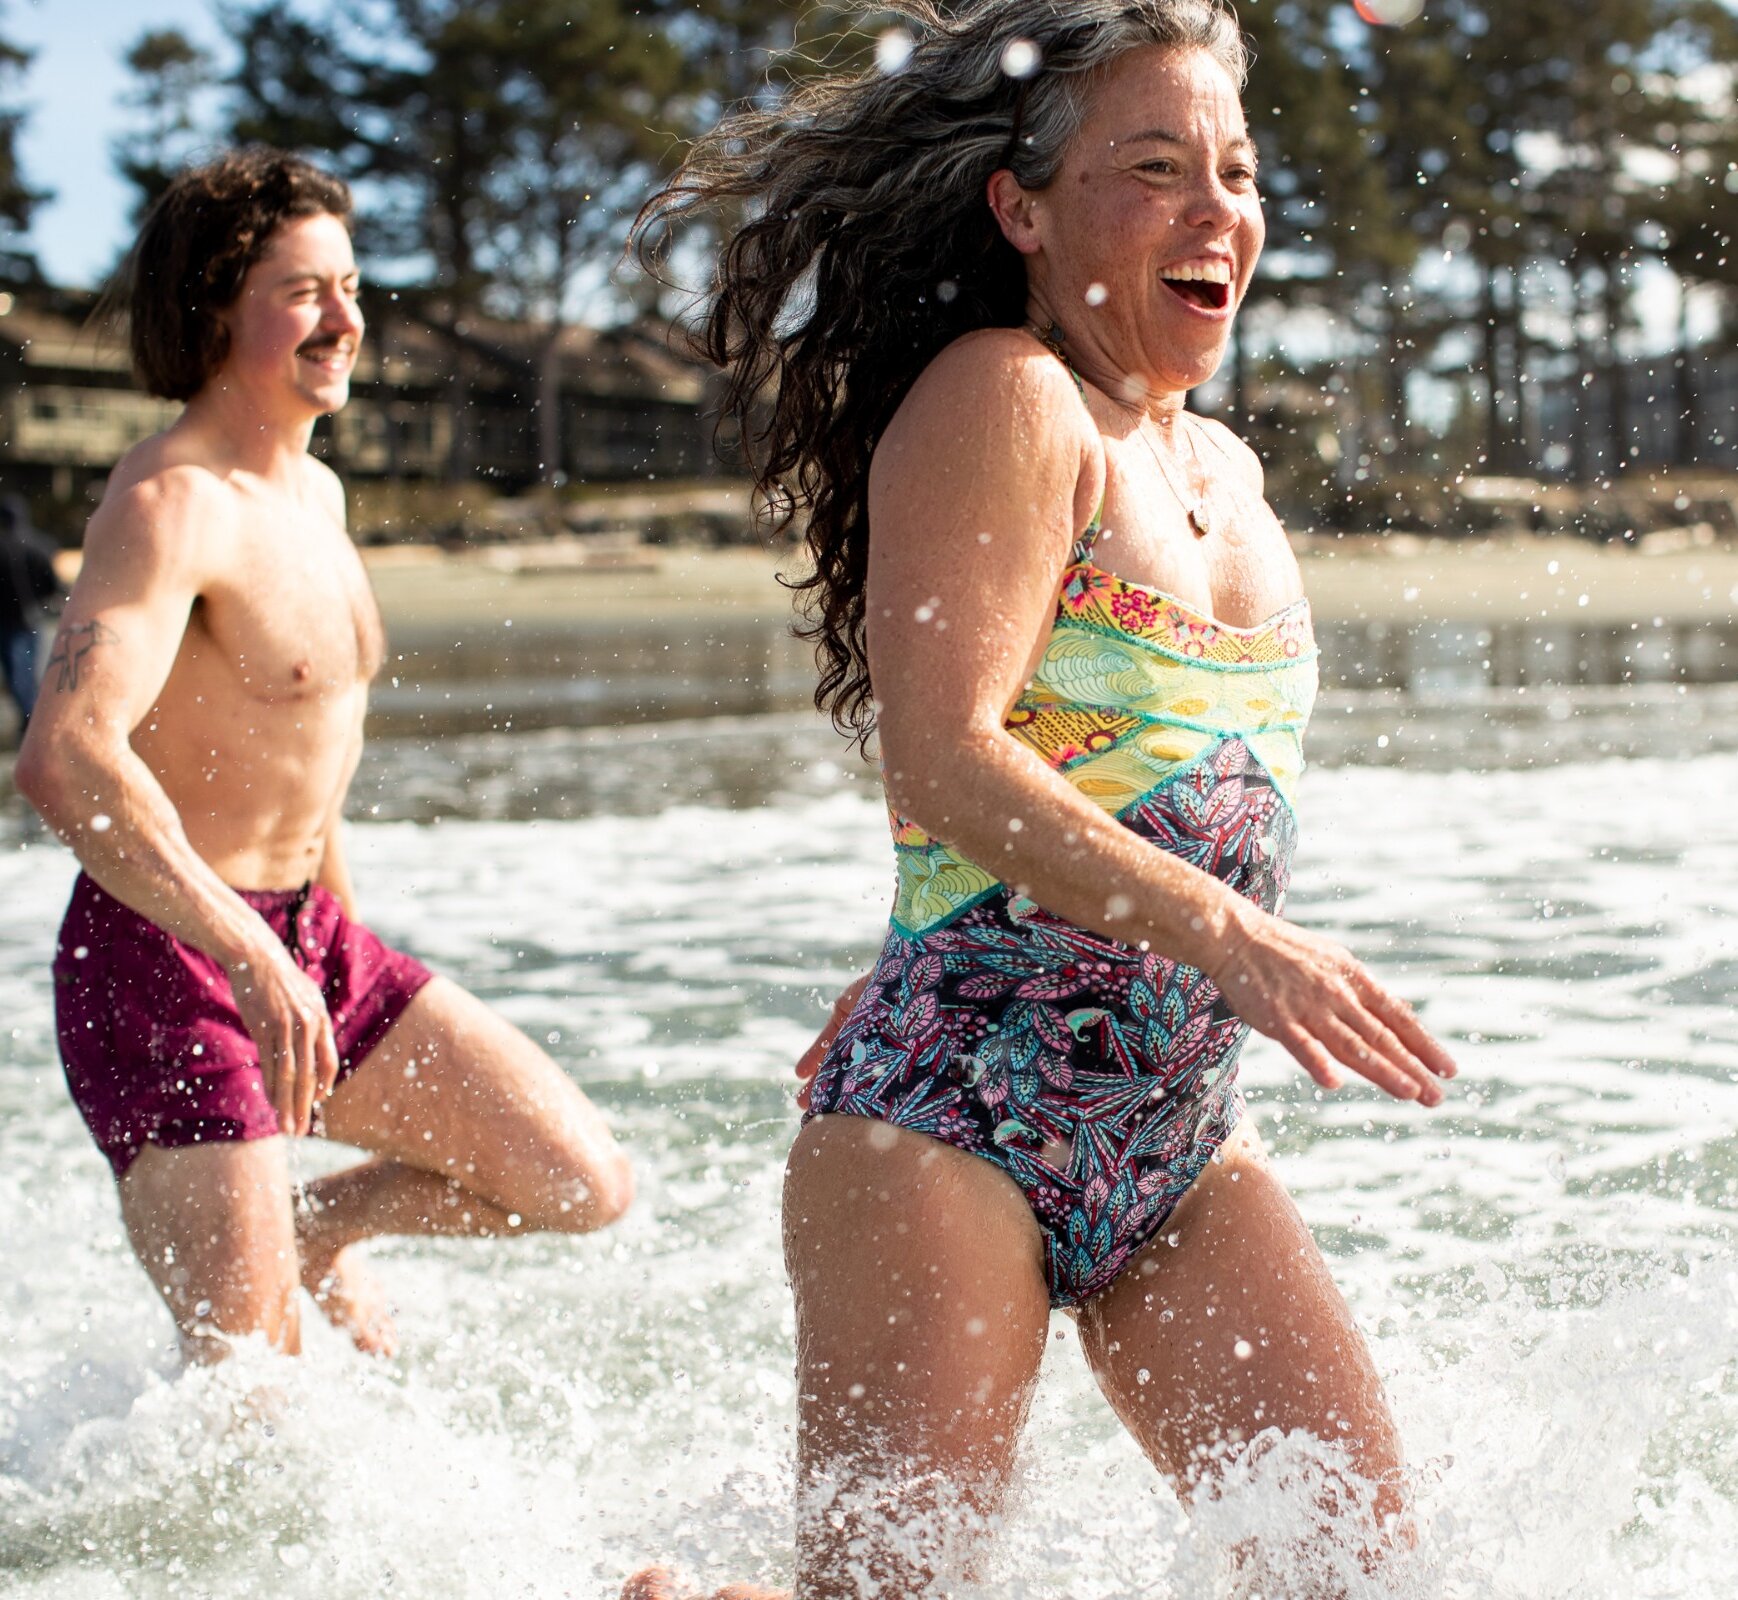 People running  from the sauna into the ocean waves